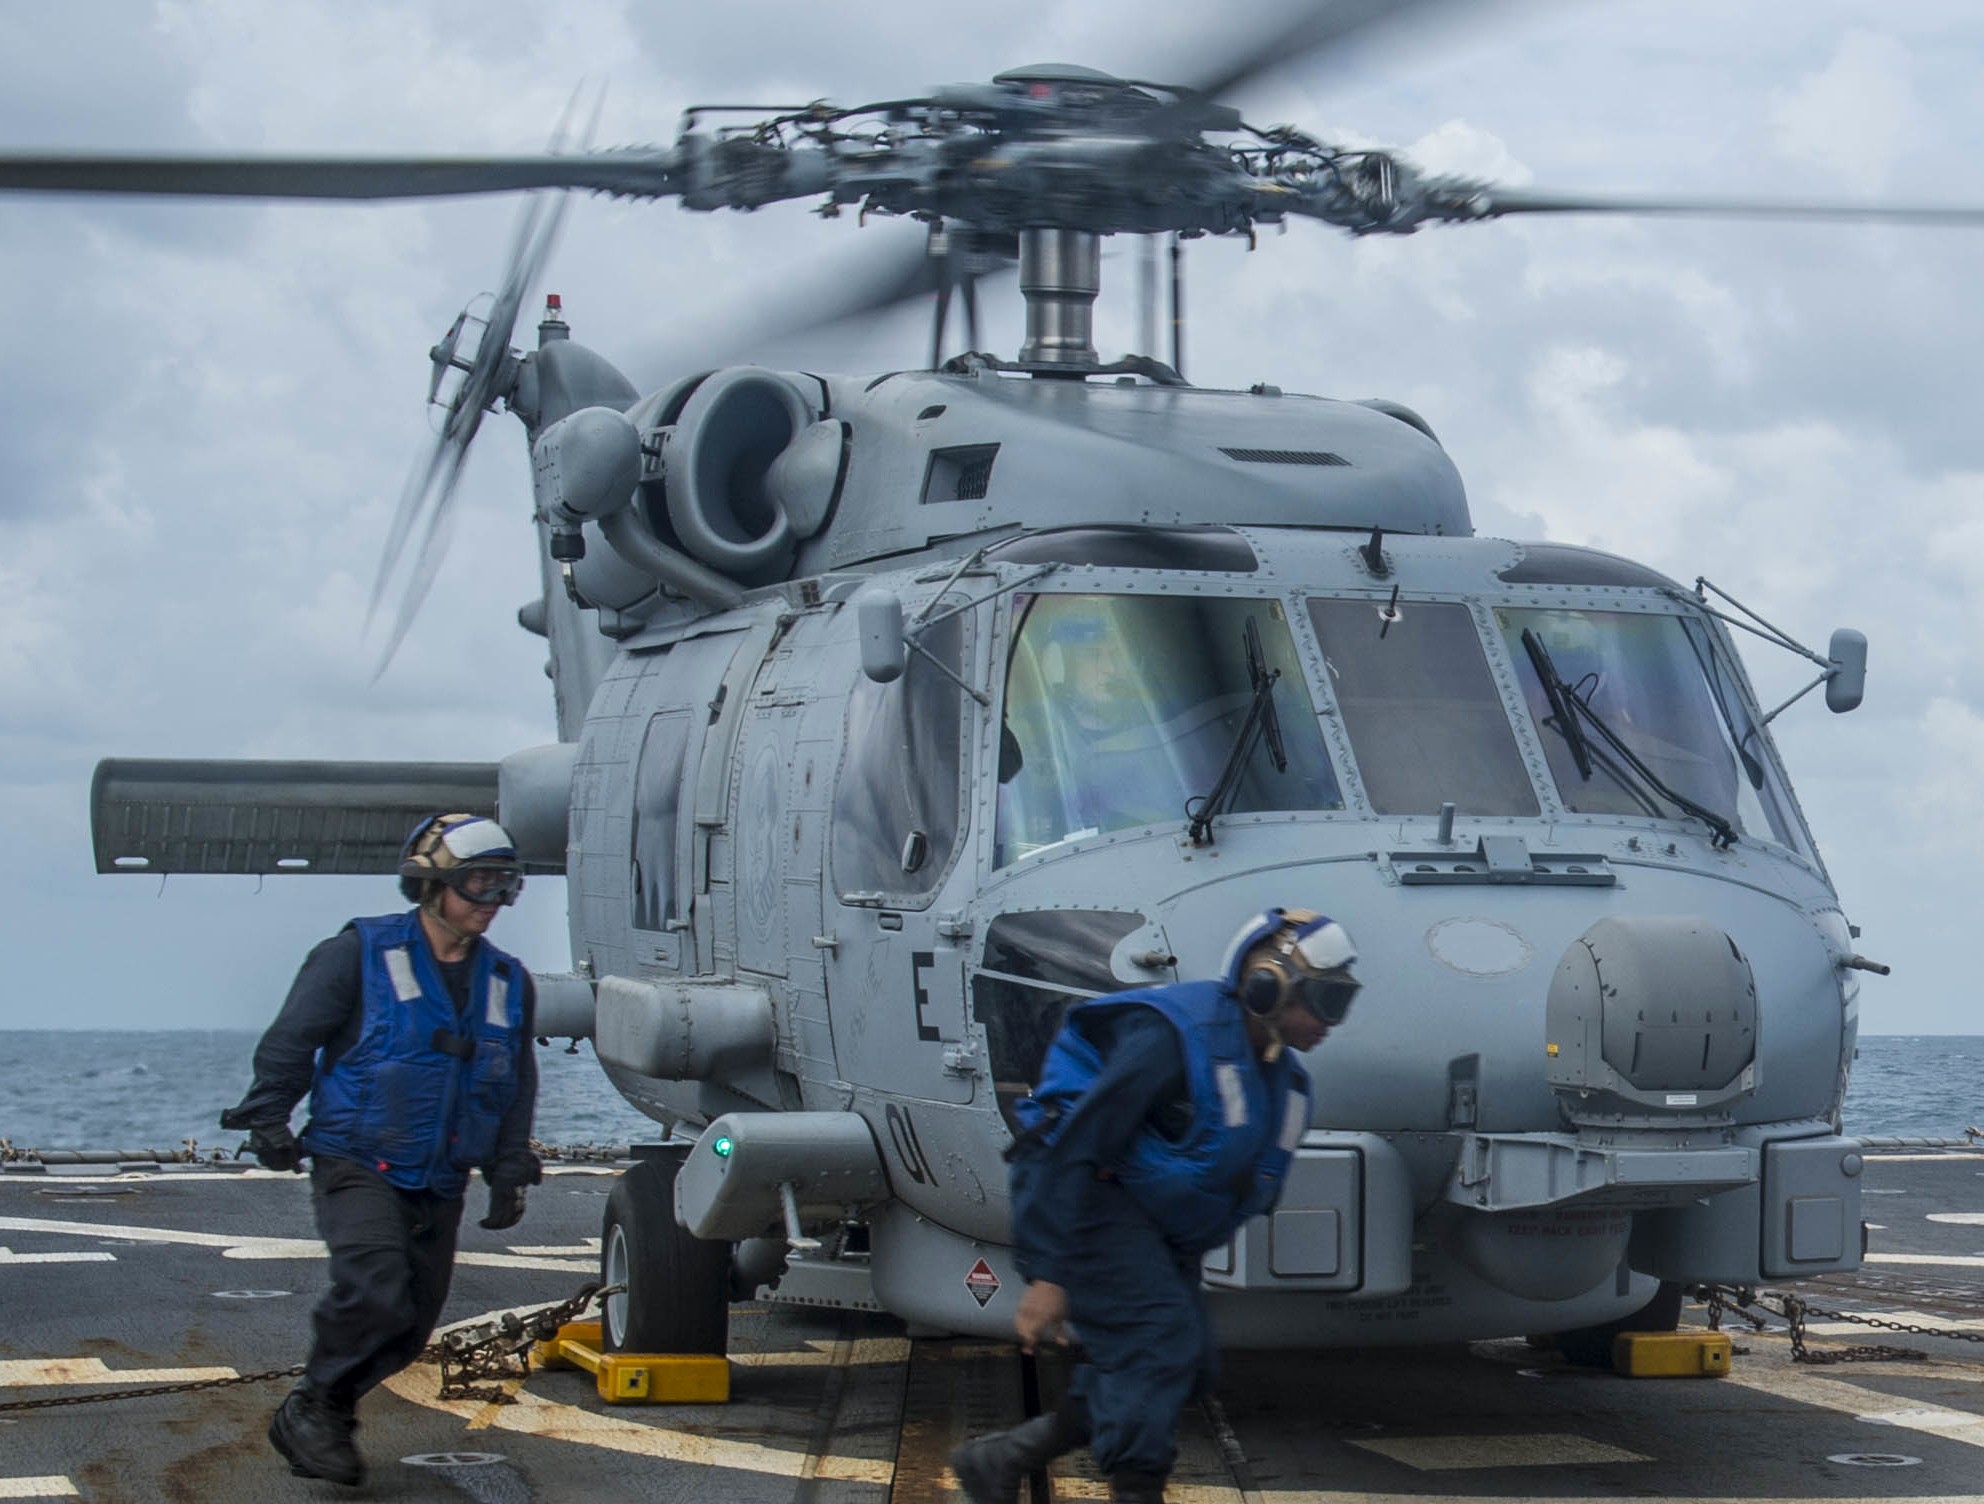 hsm-51 warlords helicopter maritime strike squadron mh-60r seahawk navy 2015 65 uss mustin ddg-89